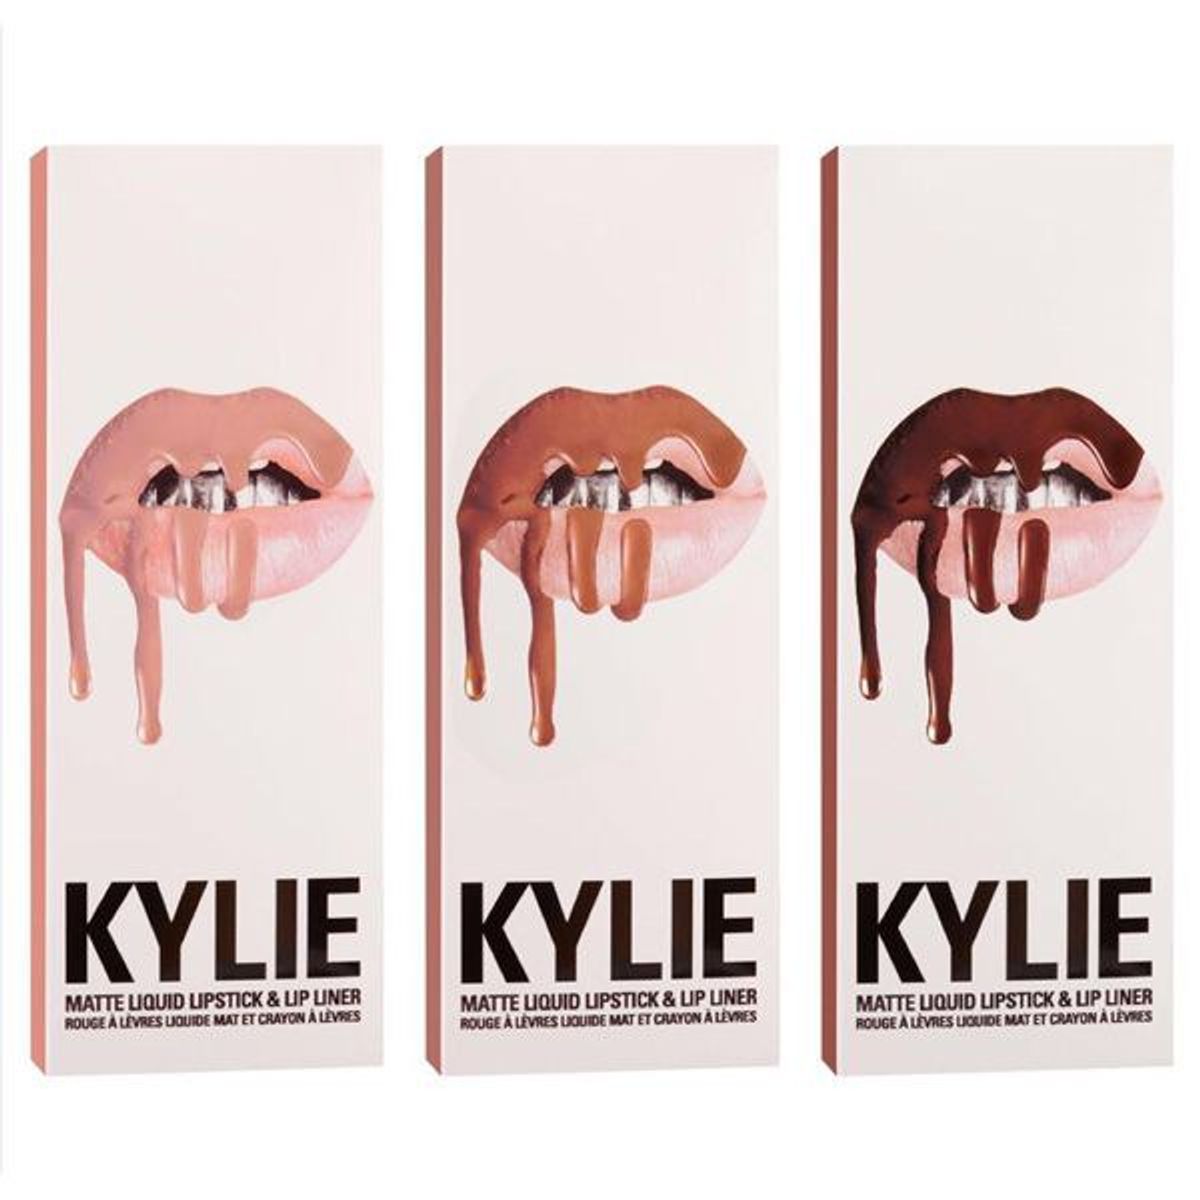 Kylie Cosmetics Is The Dupe, Not Colourpop